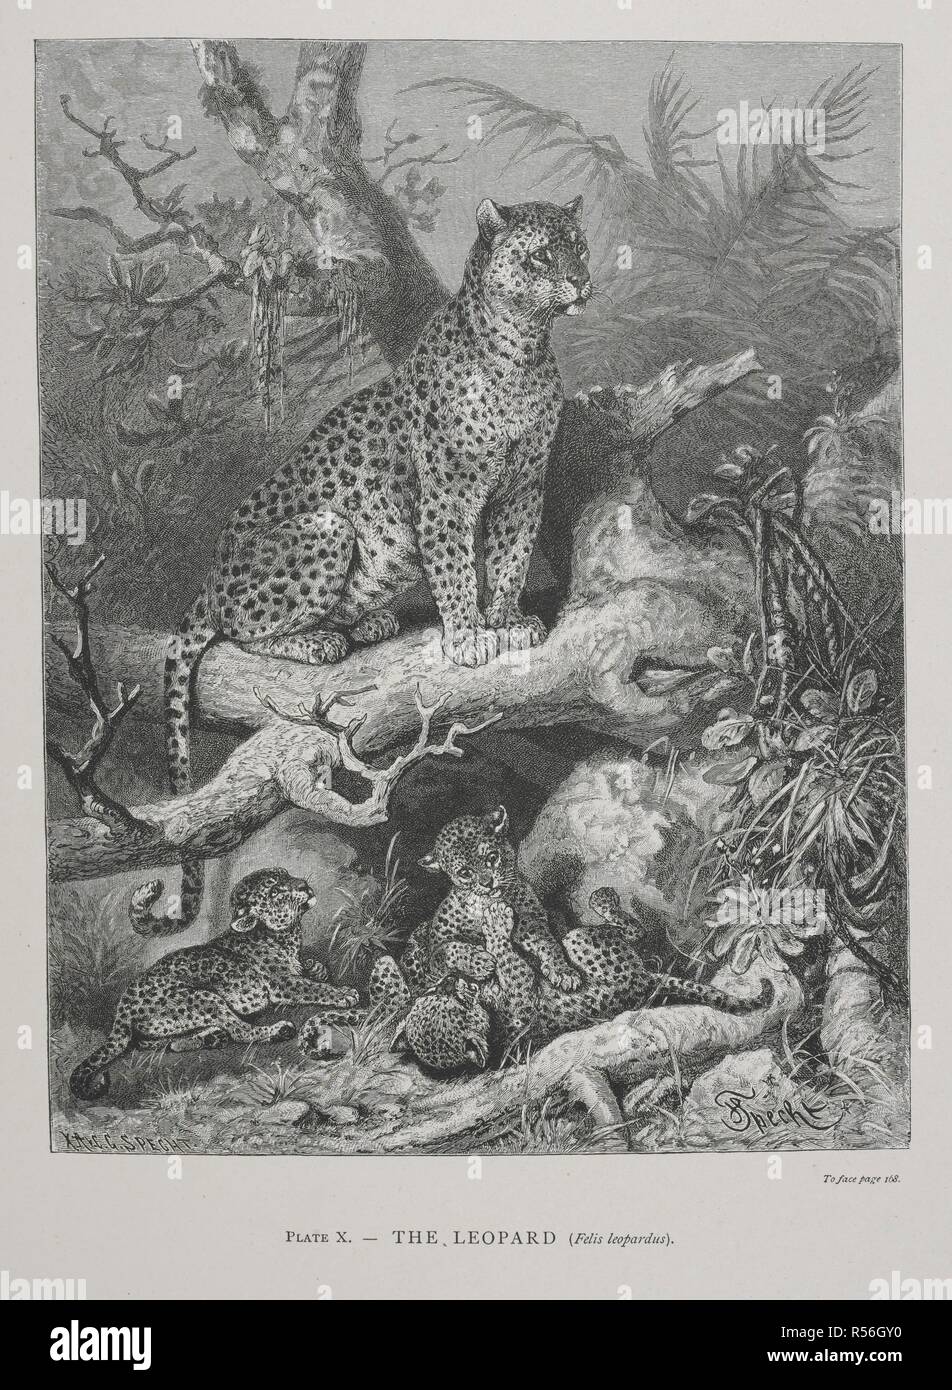 The Leopard. The Geographical Distribution of Animals, with a study of the relations of living and extinct faunas as elucidating the past changes of the earth's surface. ... . London, 1876. Source: 07209.dd.1 plate X. Author: WALLACE, ALFRED RUSSEL. Stock Photo